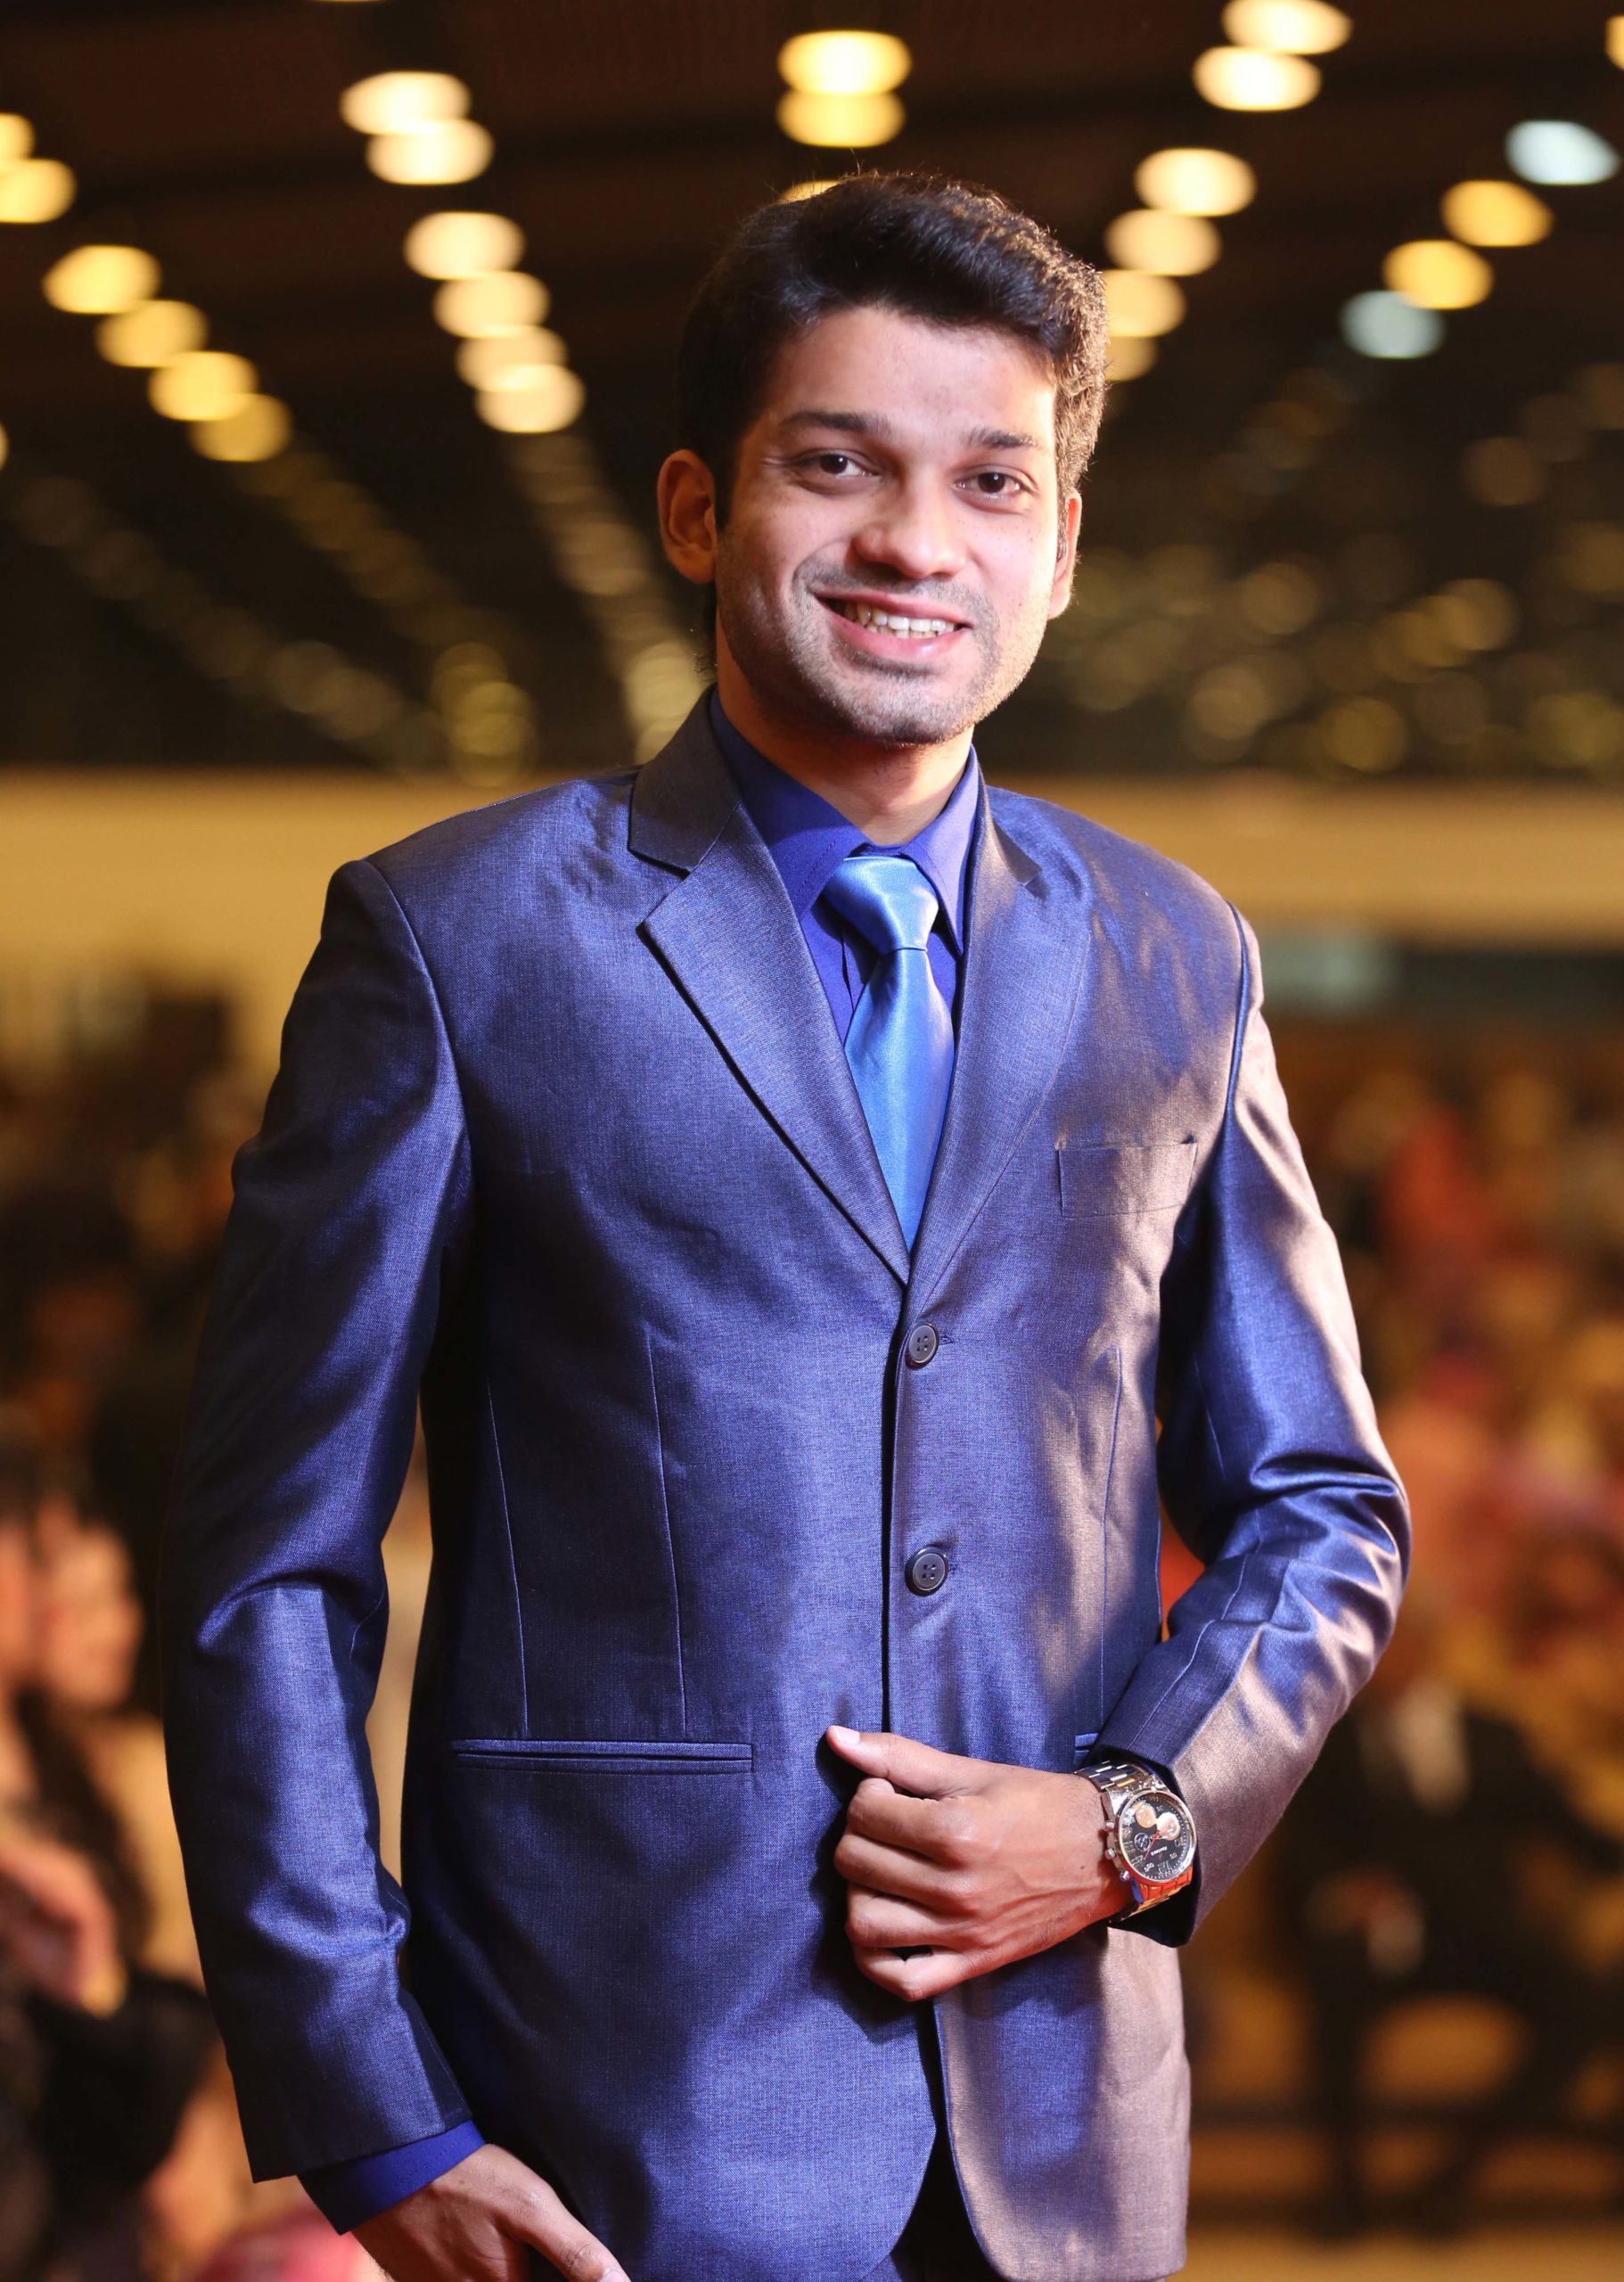 photograph of internet entrepreneur Ismail Zakaria dressed professionally in a suit